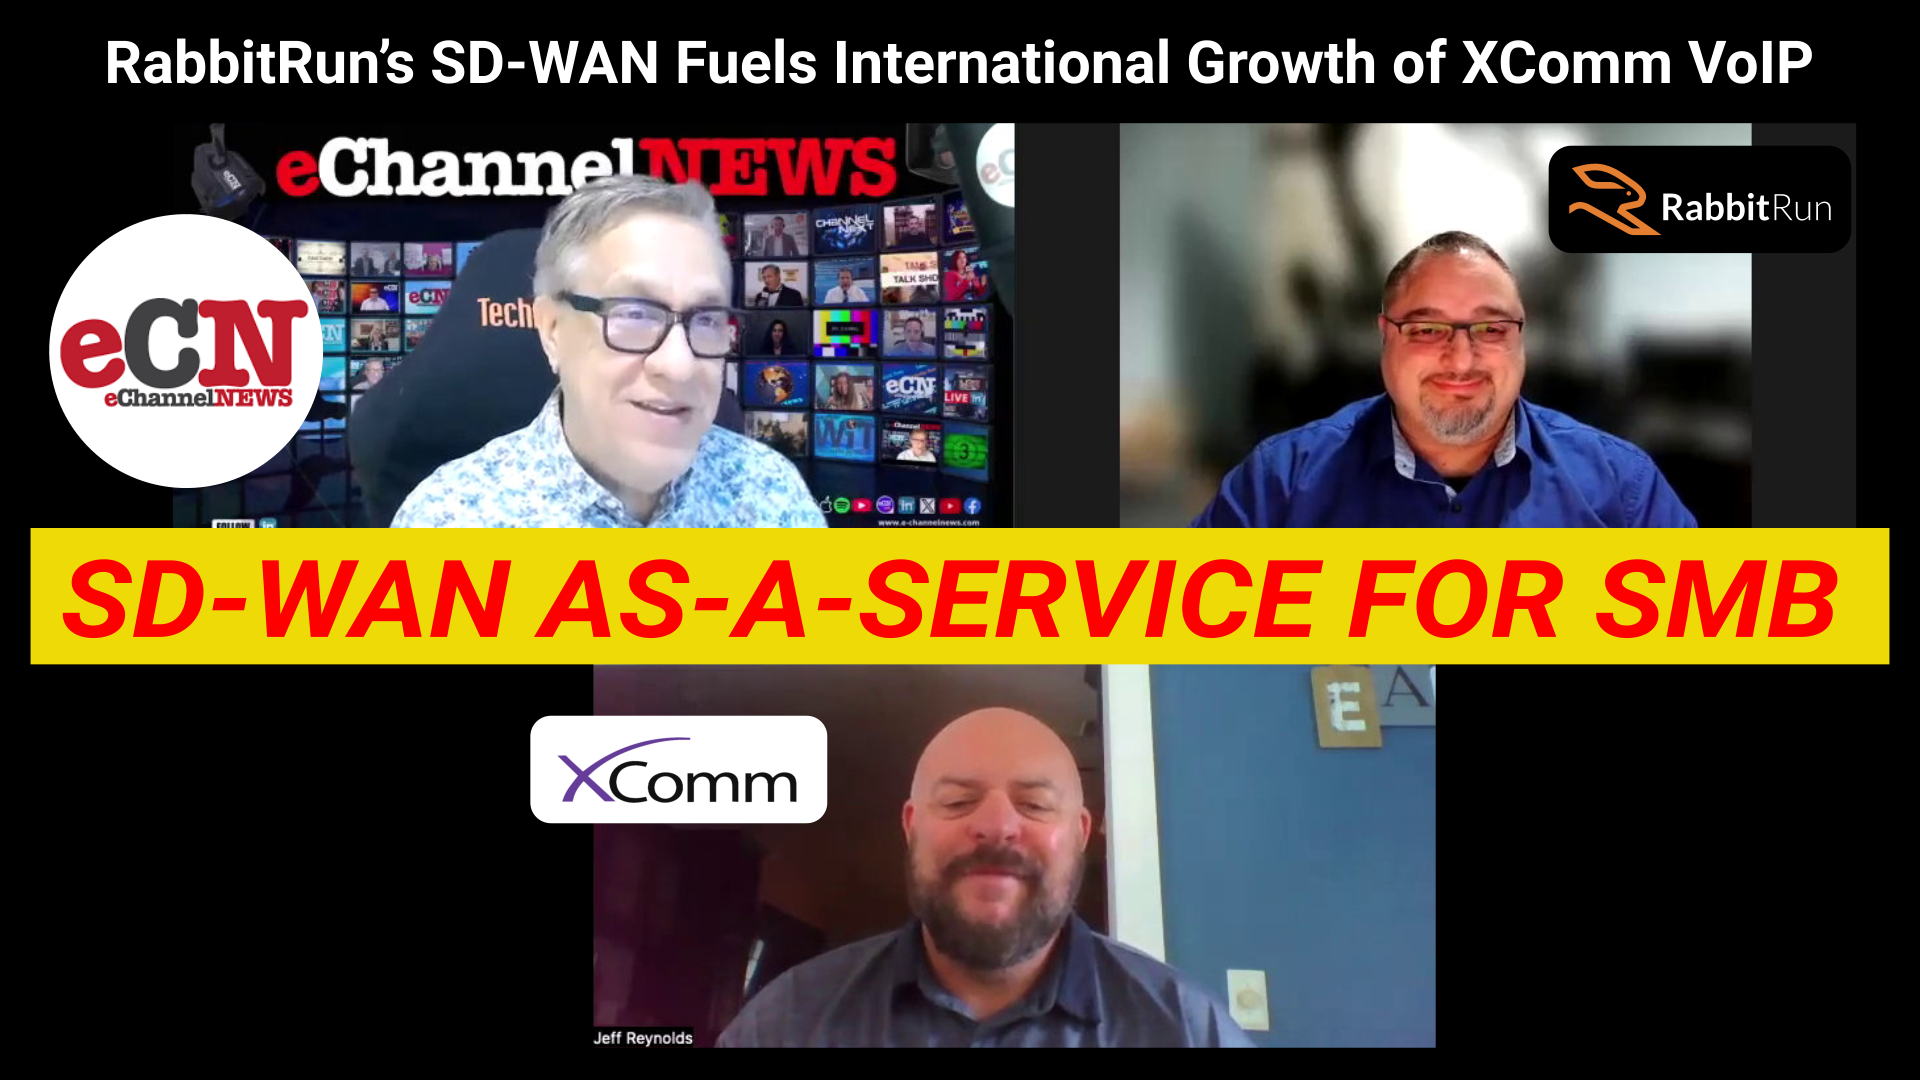 RabbitRun’s SD-WAN Fuels International Growth for XComm Communications VoIP